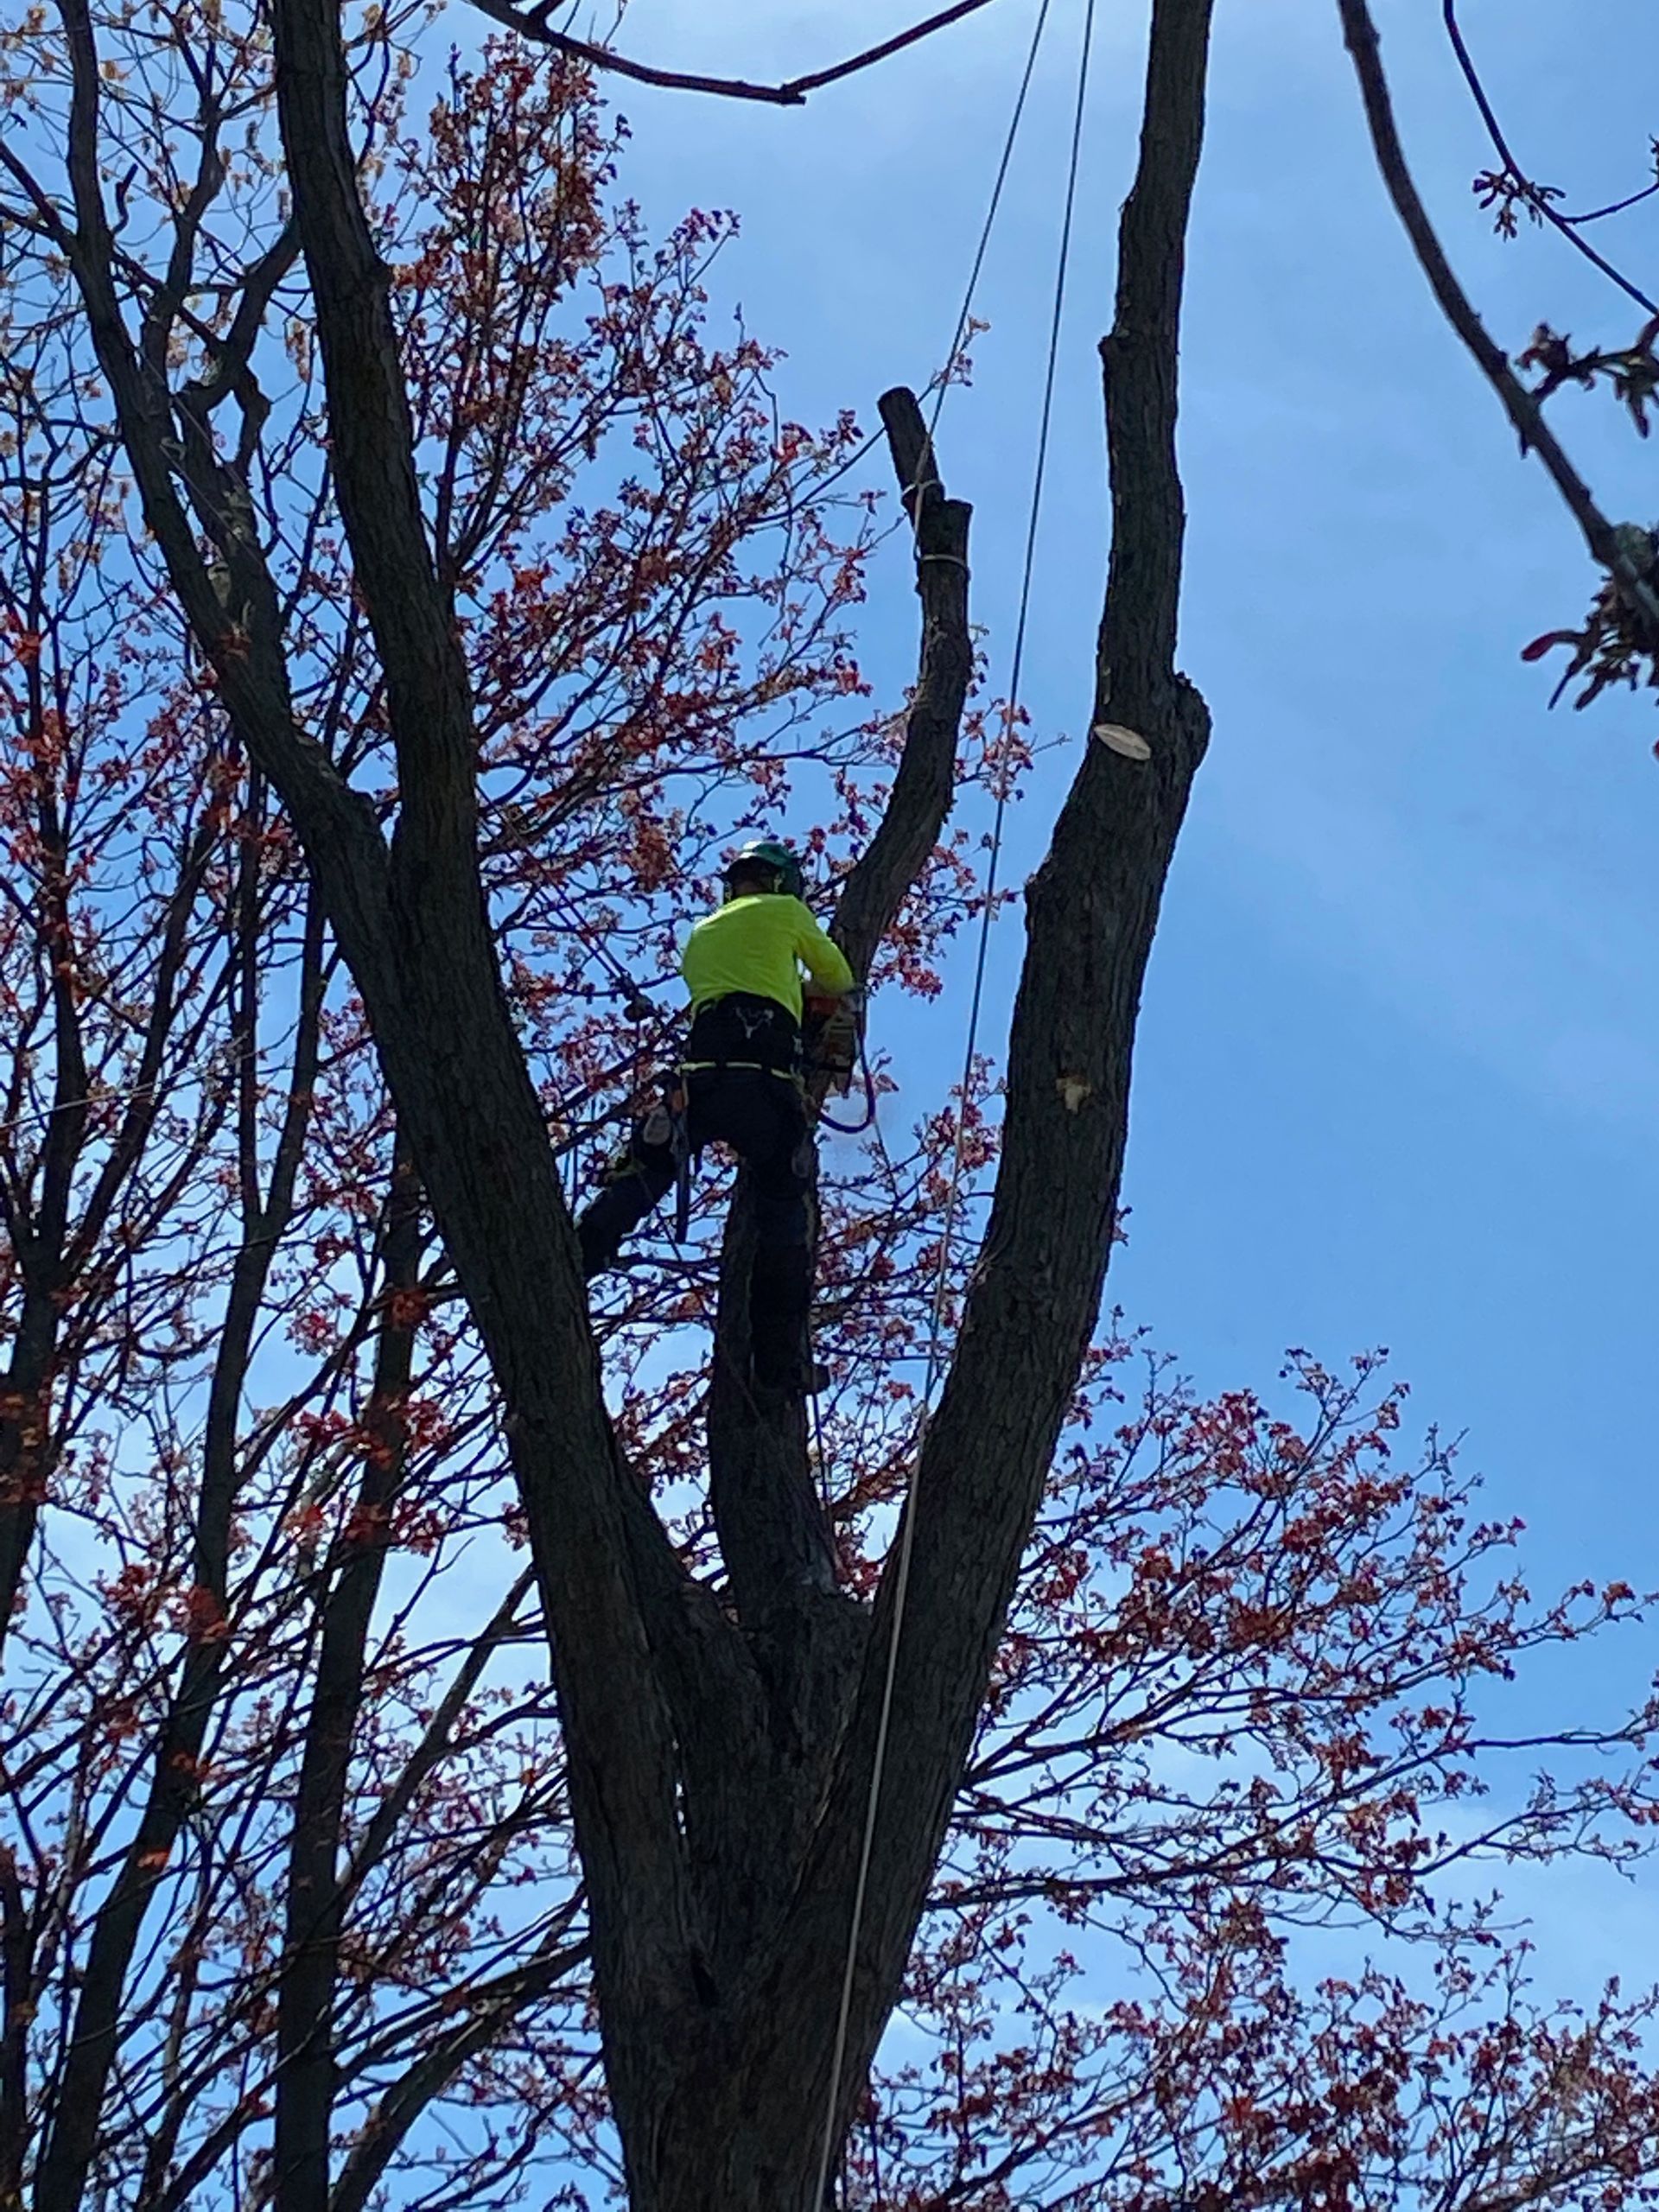 Tree Trimming Services With Arborcor